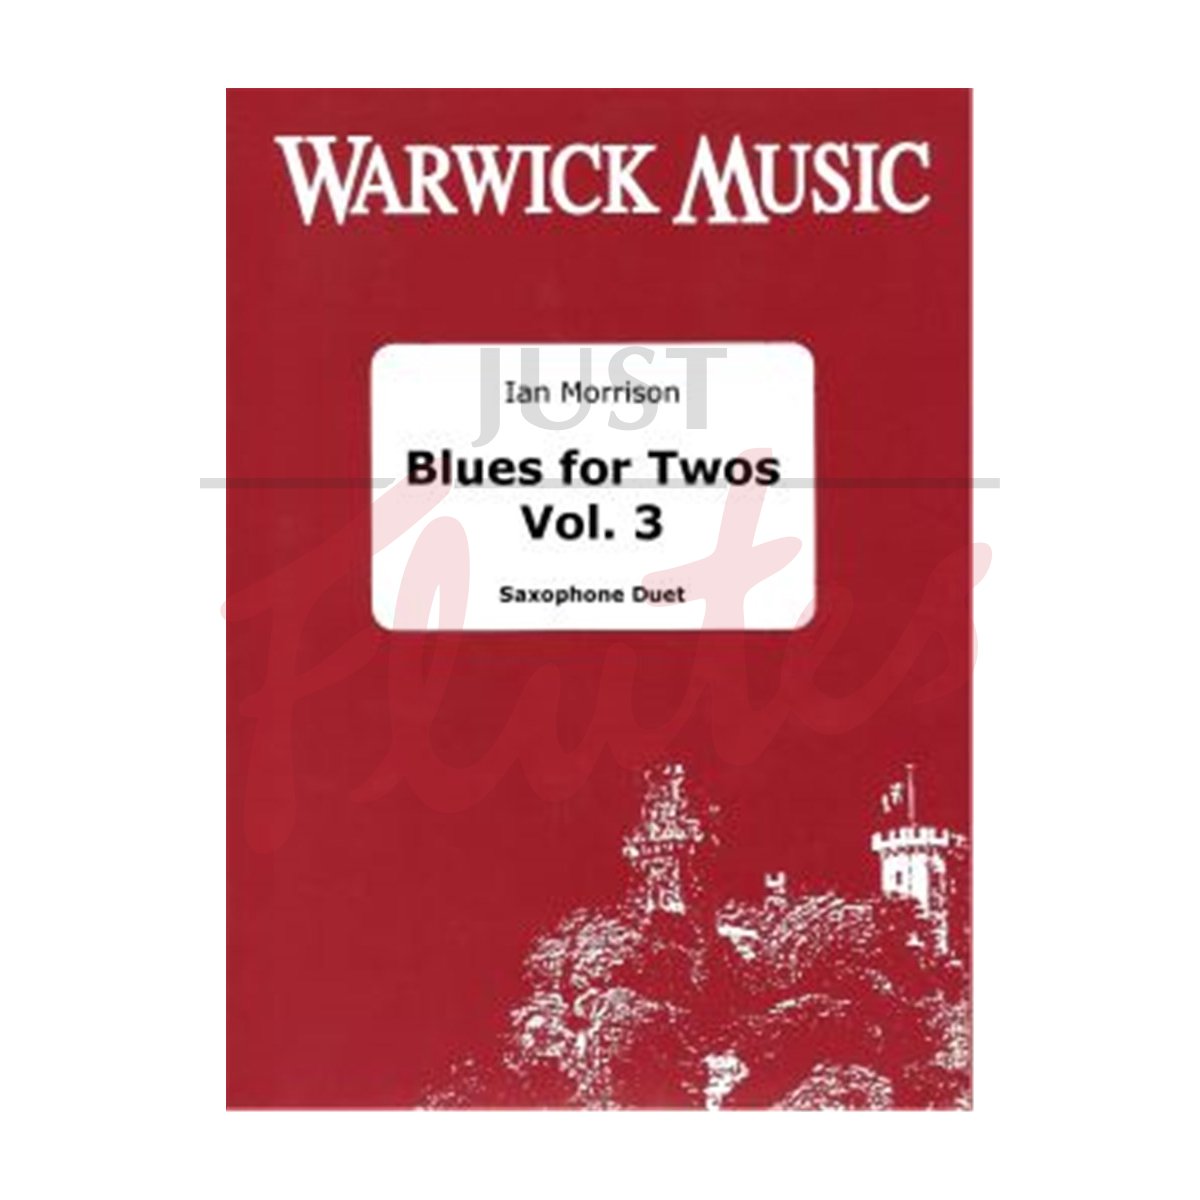 Blues for Twos, Volume 3 for Saxophone Duet